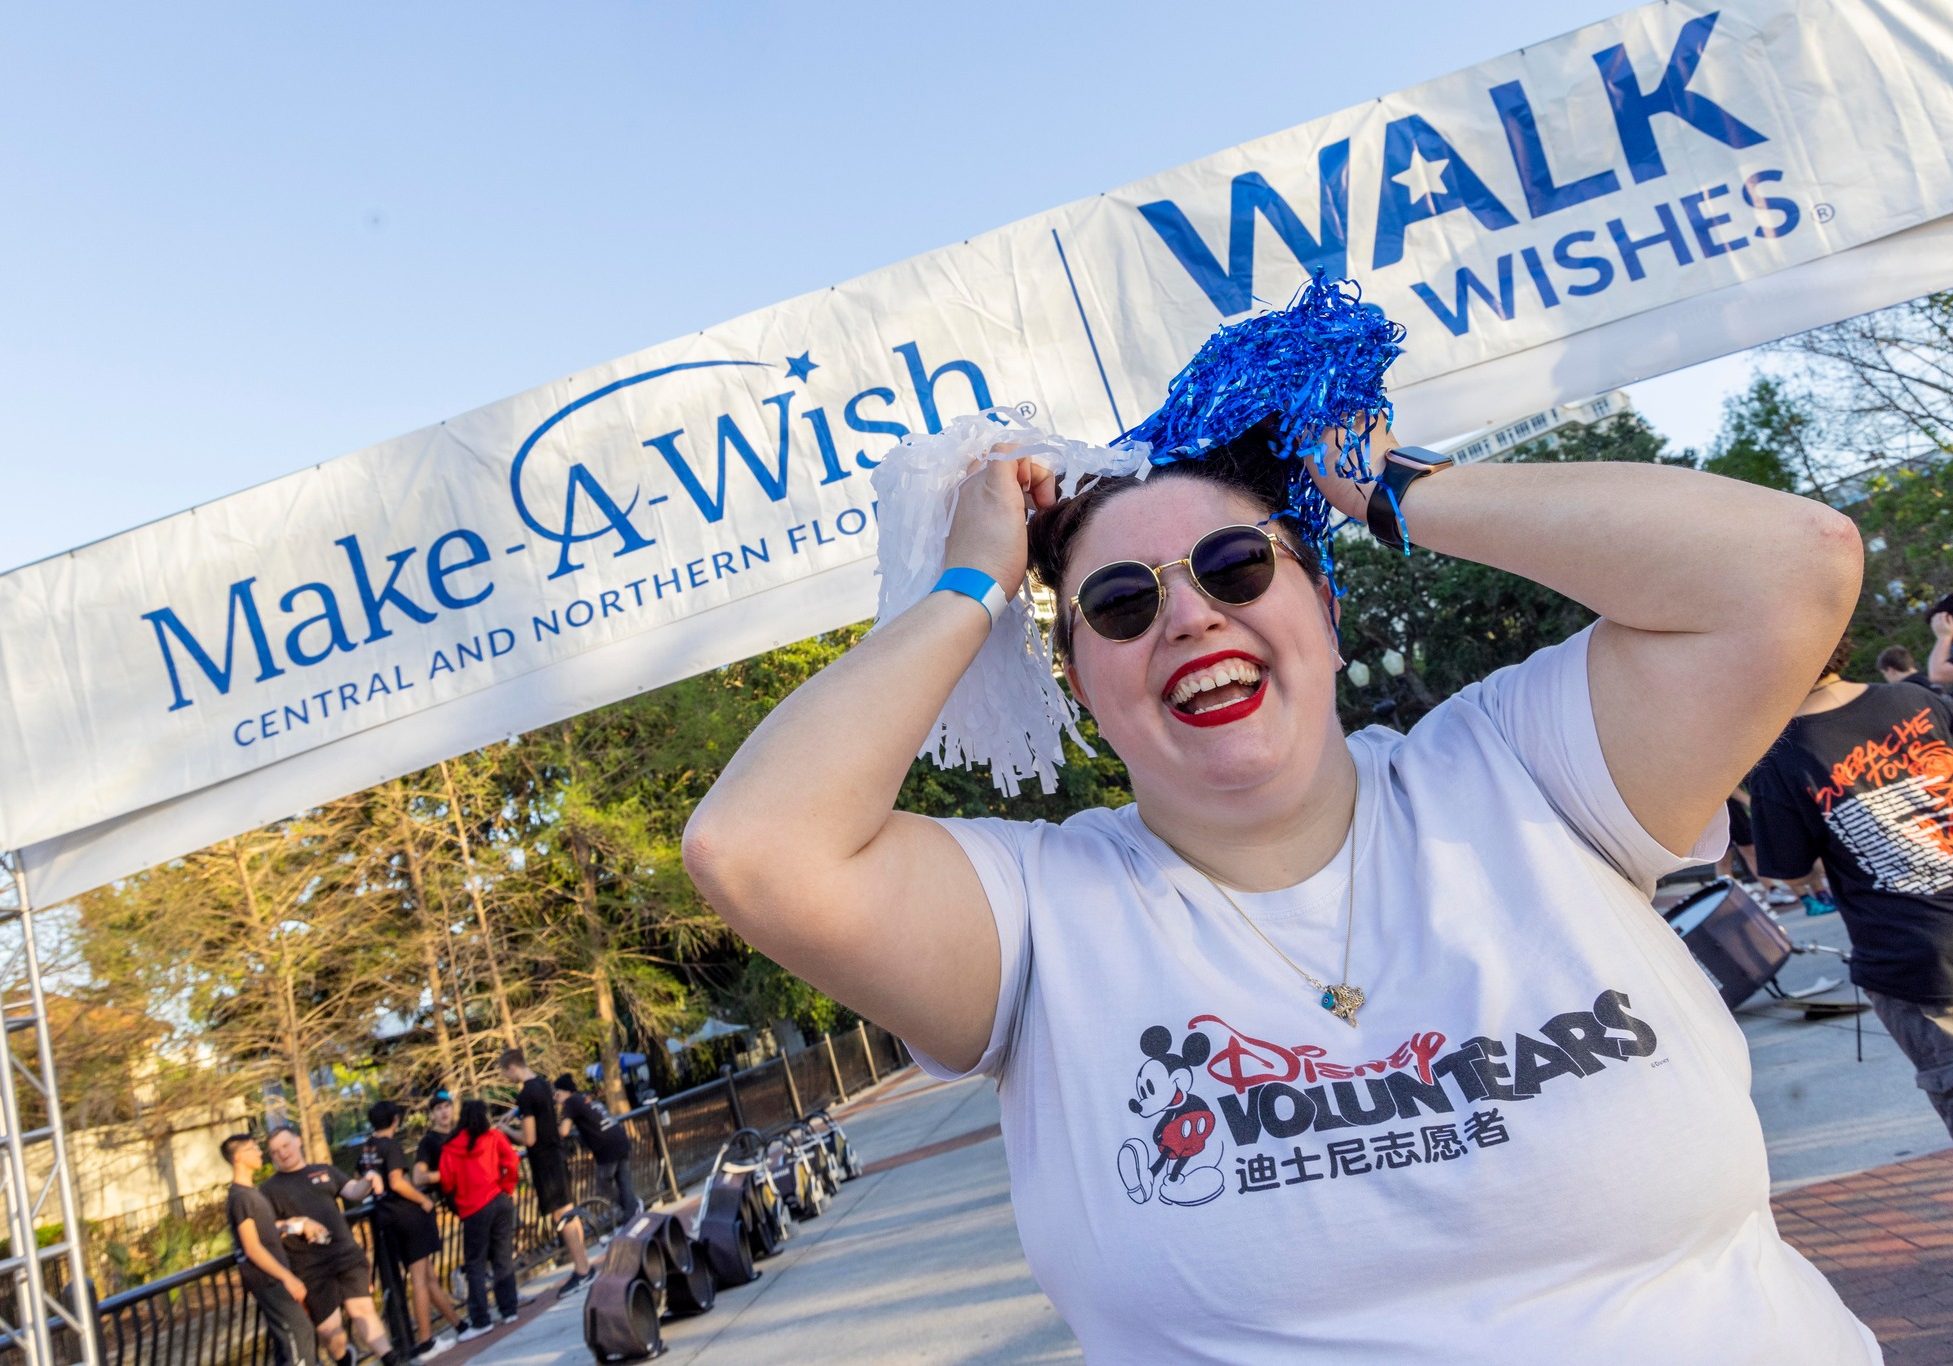 Disney cast member standing underneath a Make-A-Wish and Walk for Wishes banner at the start line